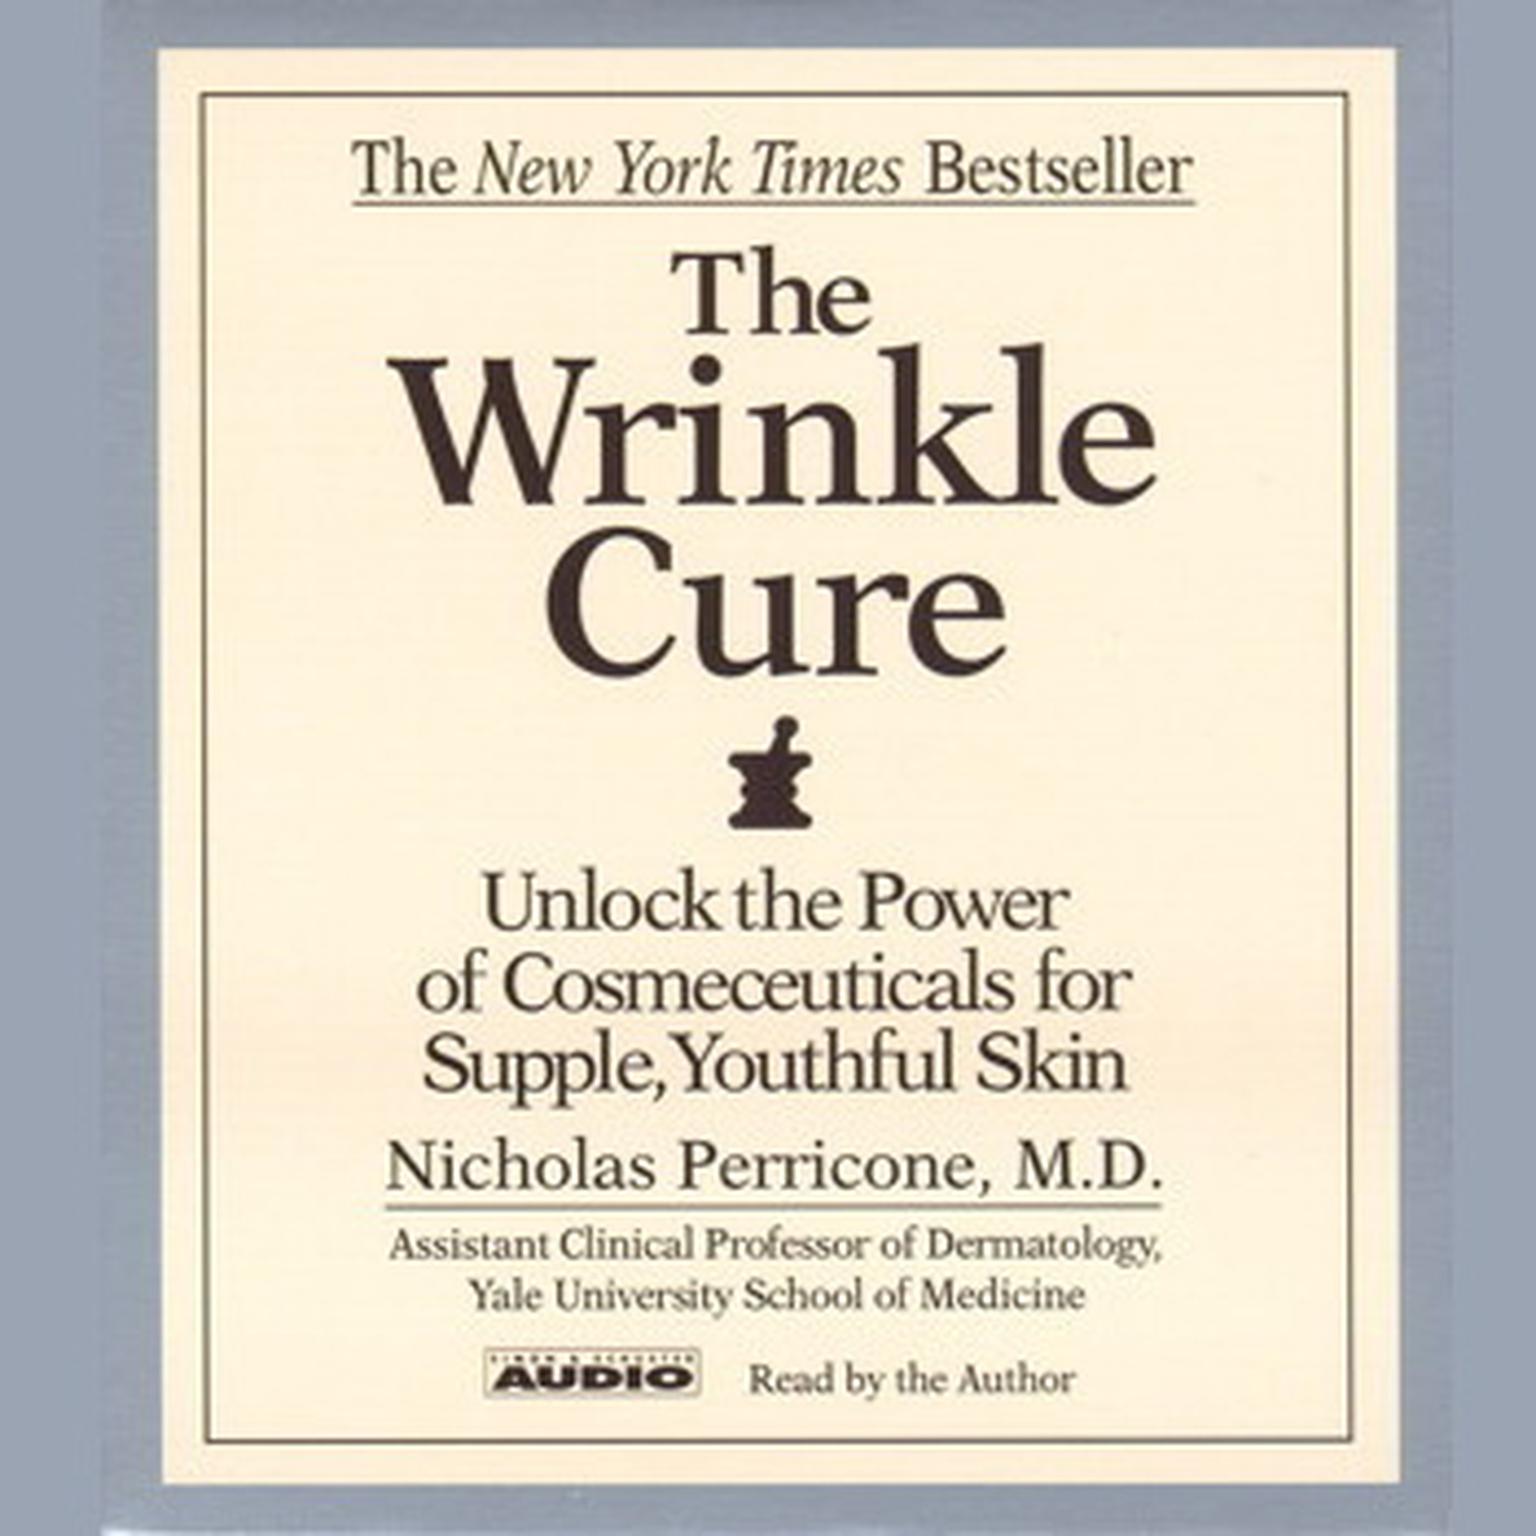 The Wrinkle Cure (Abridged): Unlock the Power of Cosmeceuticals for Supple, Youthful Skin Audiobook, by Nicholas Perricone